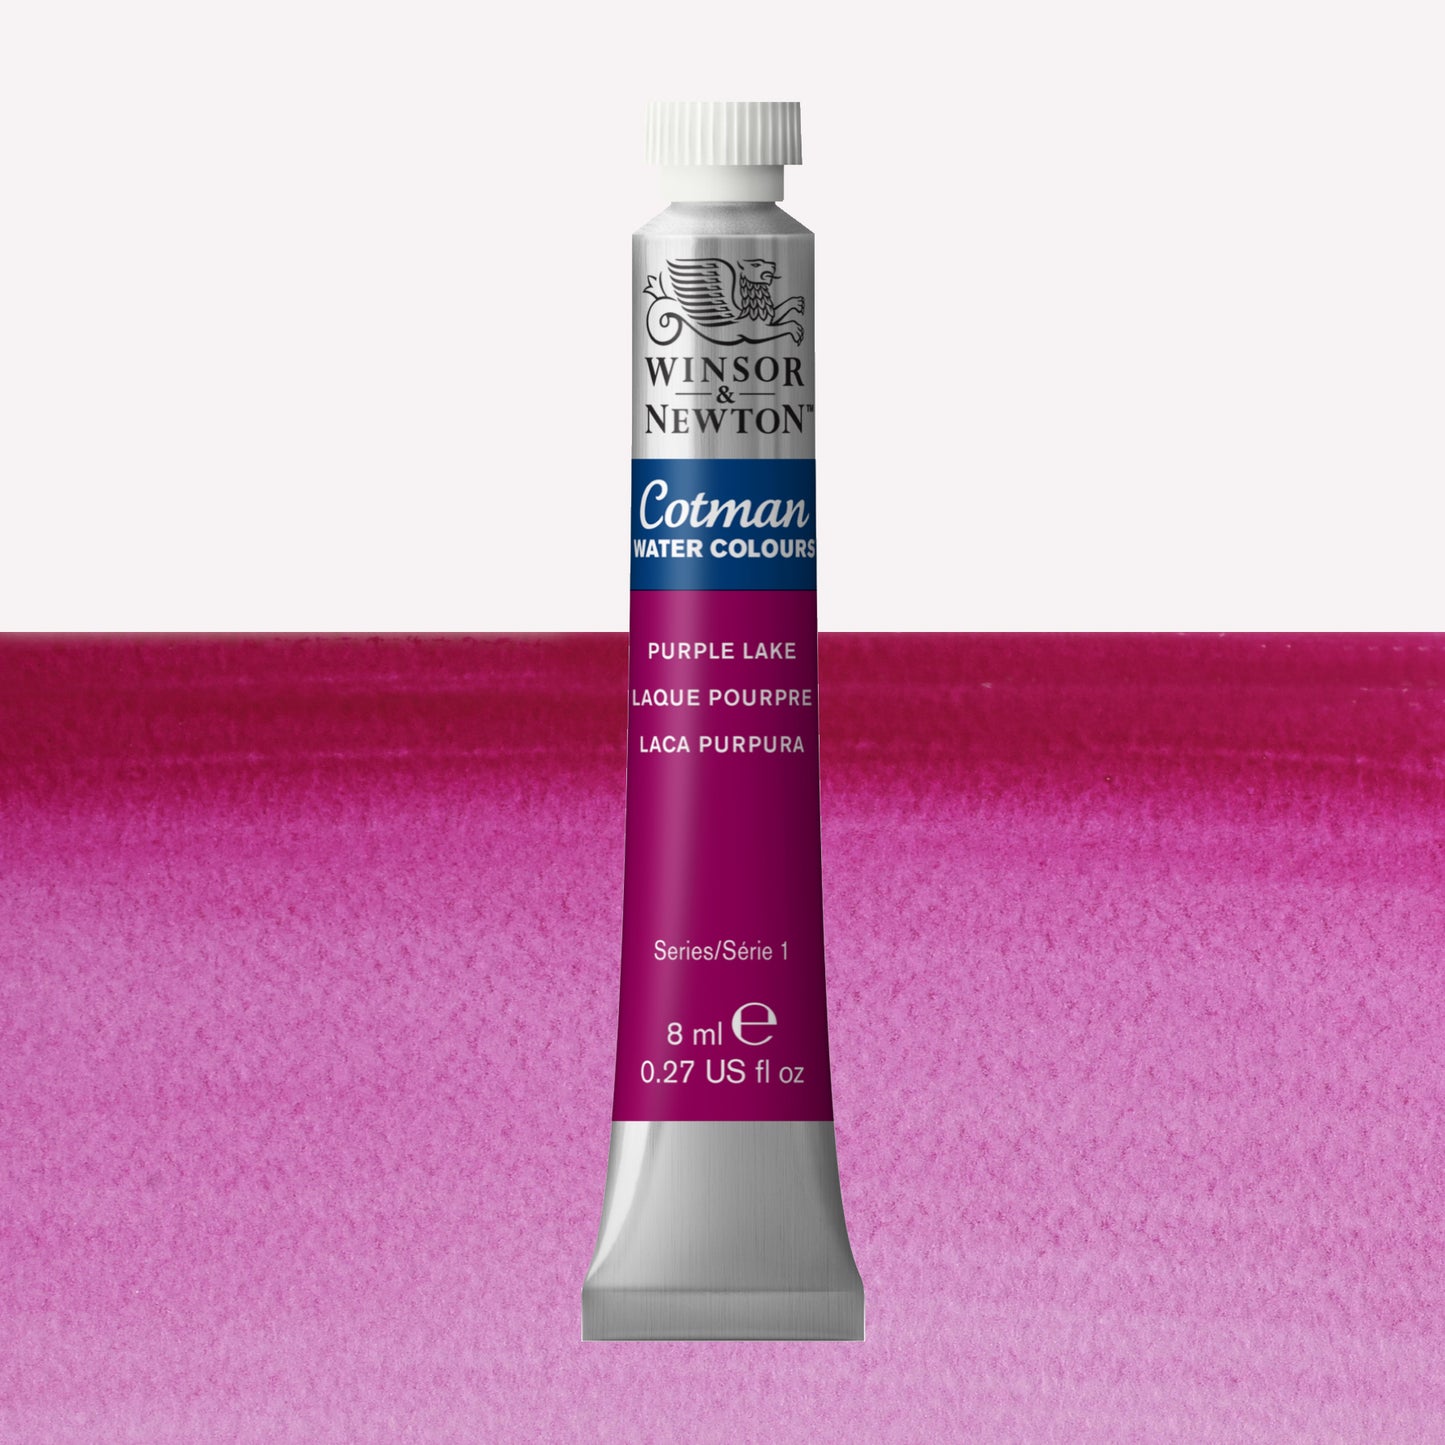 Winsor & Newton Cotman watercolour paint packaged in 8ml silver tubes with a white lid in the shade Purple Lake over a highly pigmented colour swatch.